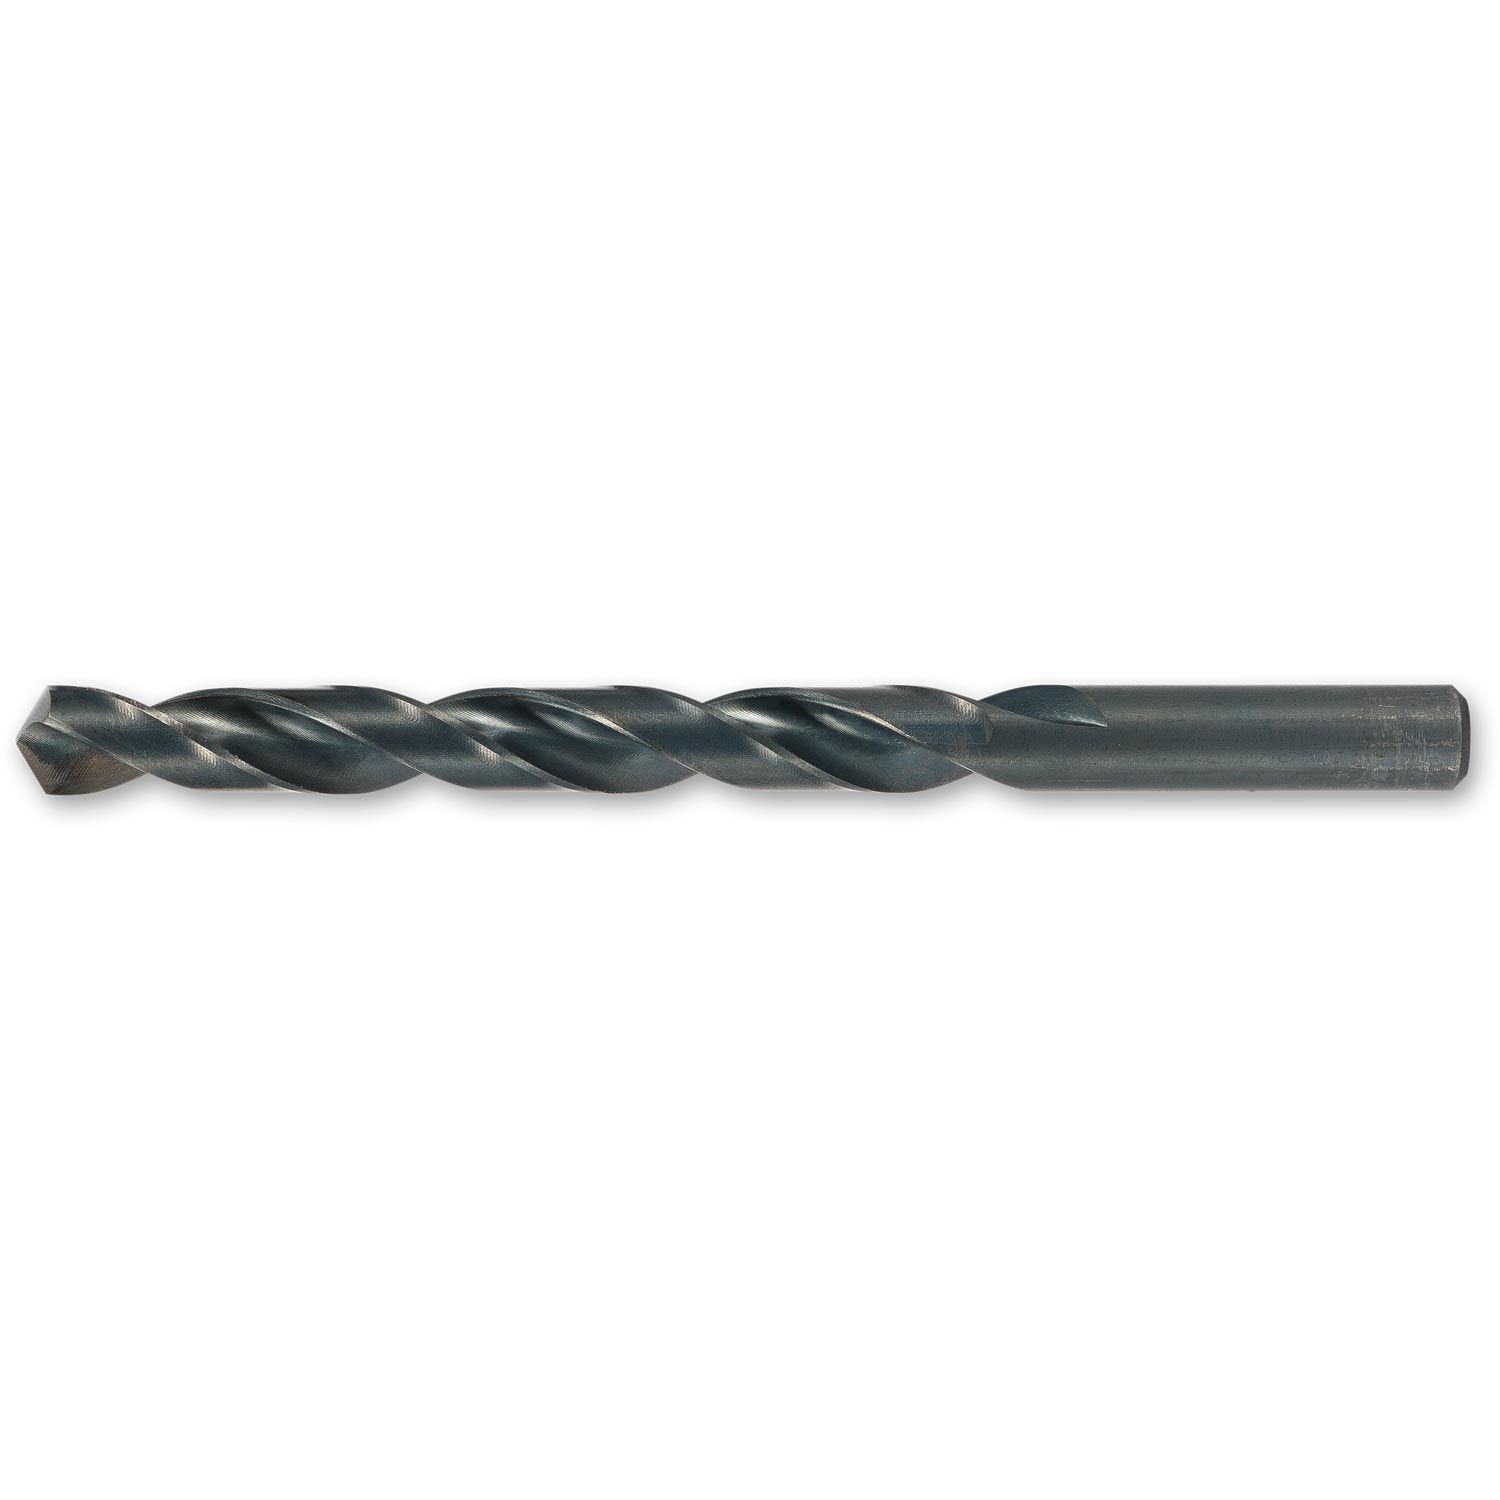 HSS extra long drill bit Ground flute M2 Steel 8.5mm Pack of 3 *Top Quality 